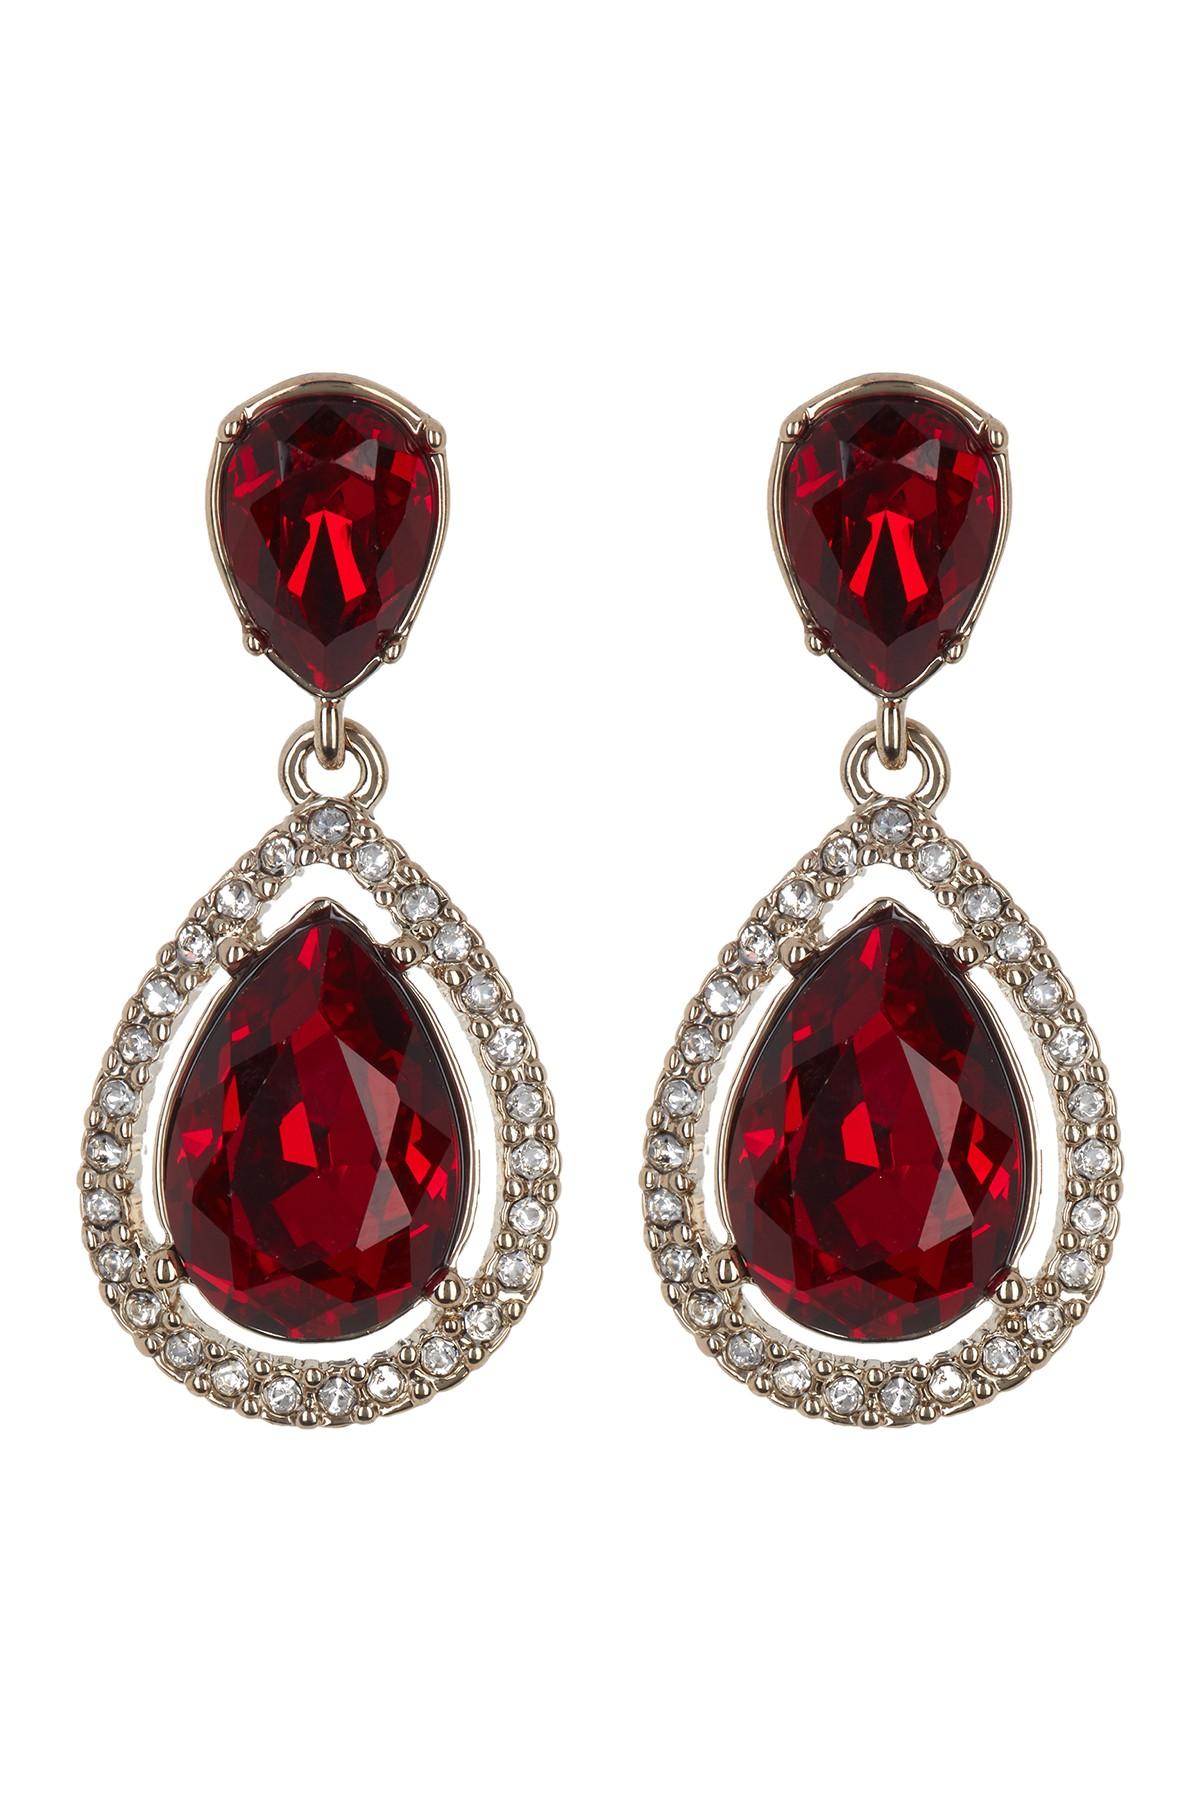 Givenchy Crystal Drop Earrings in Red - Lyst